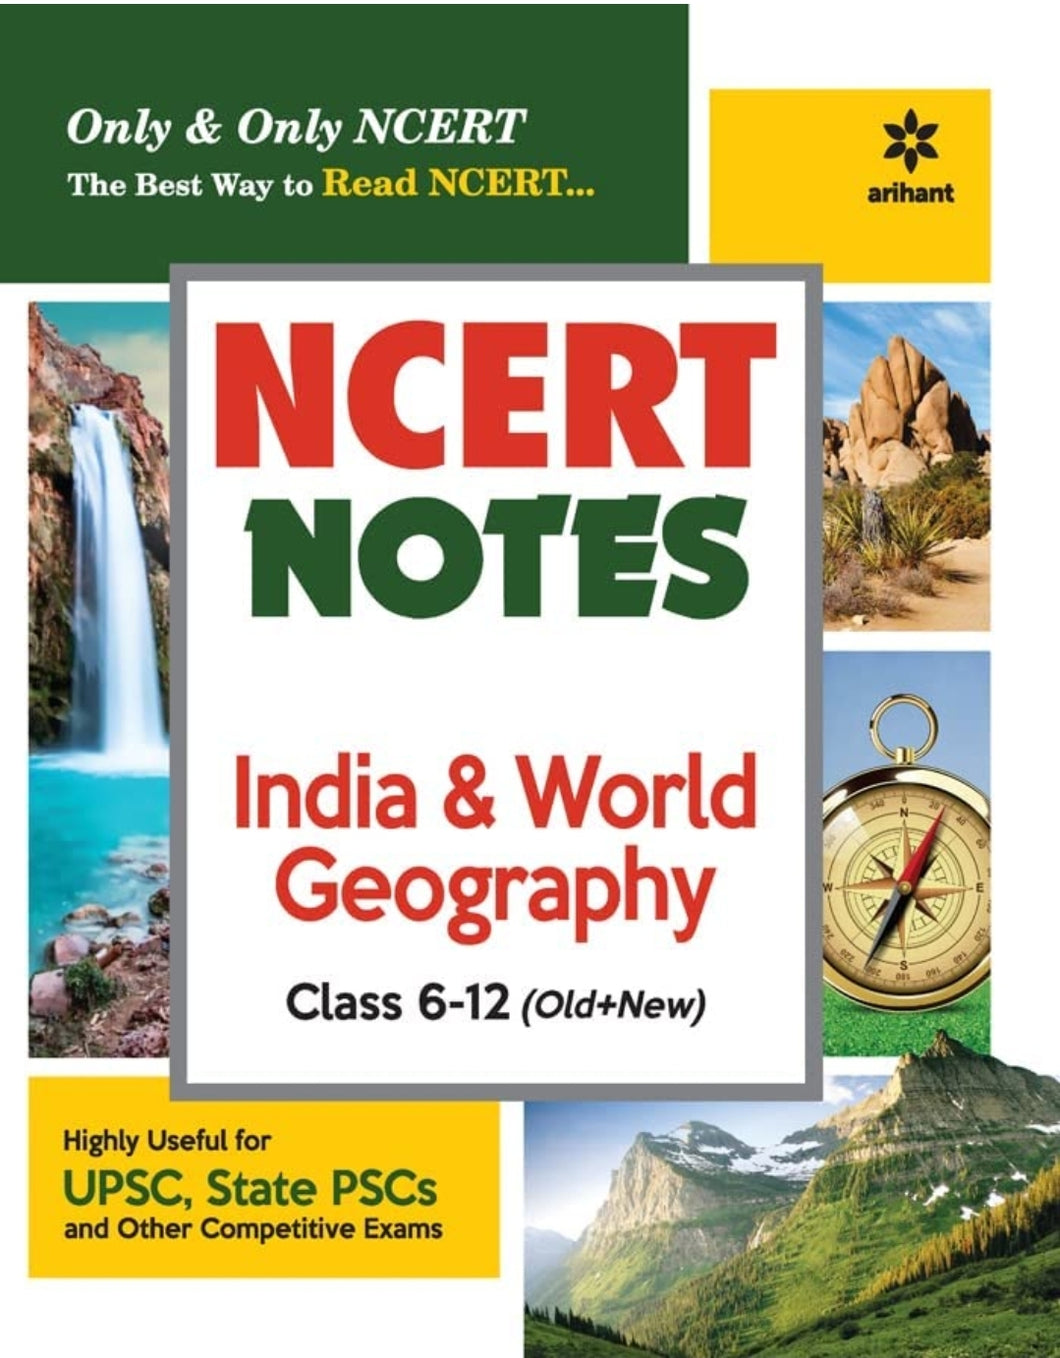 NCERT Notes India & World Geography Class 6-12 (Old+New) for UPSC , State PSC and Other Competitive Exams